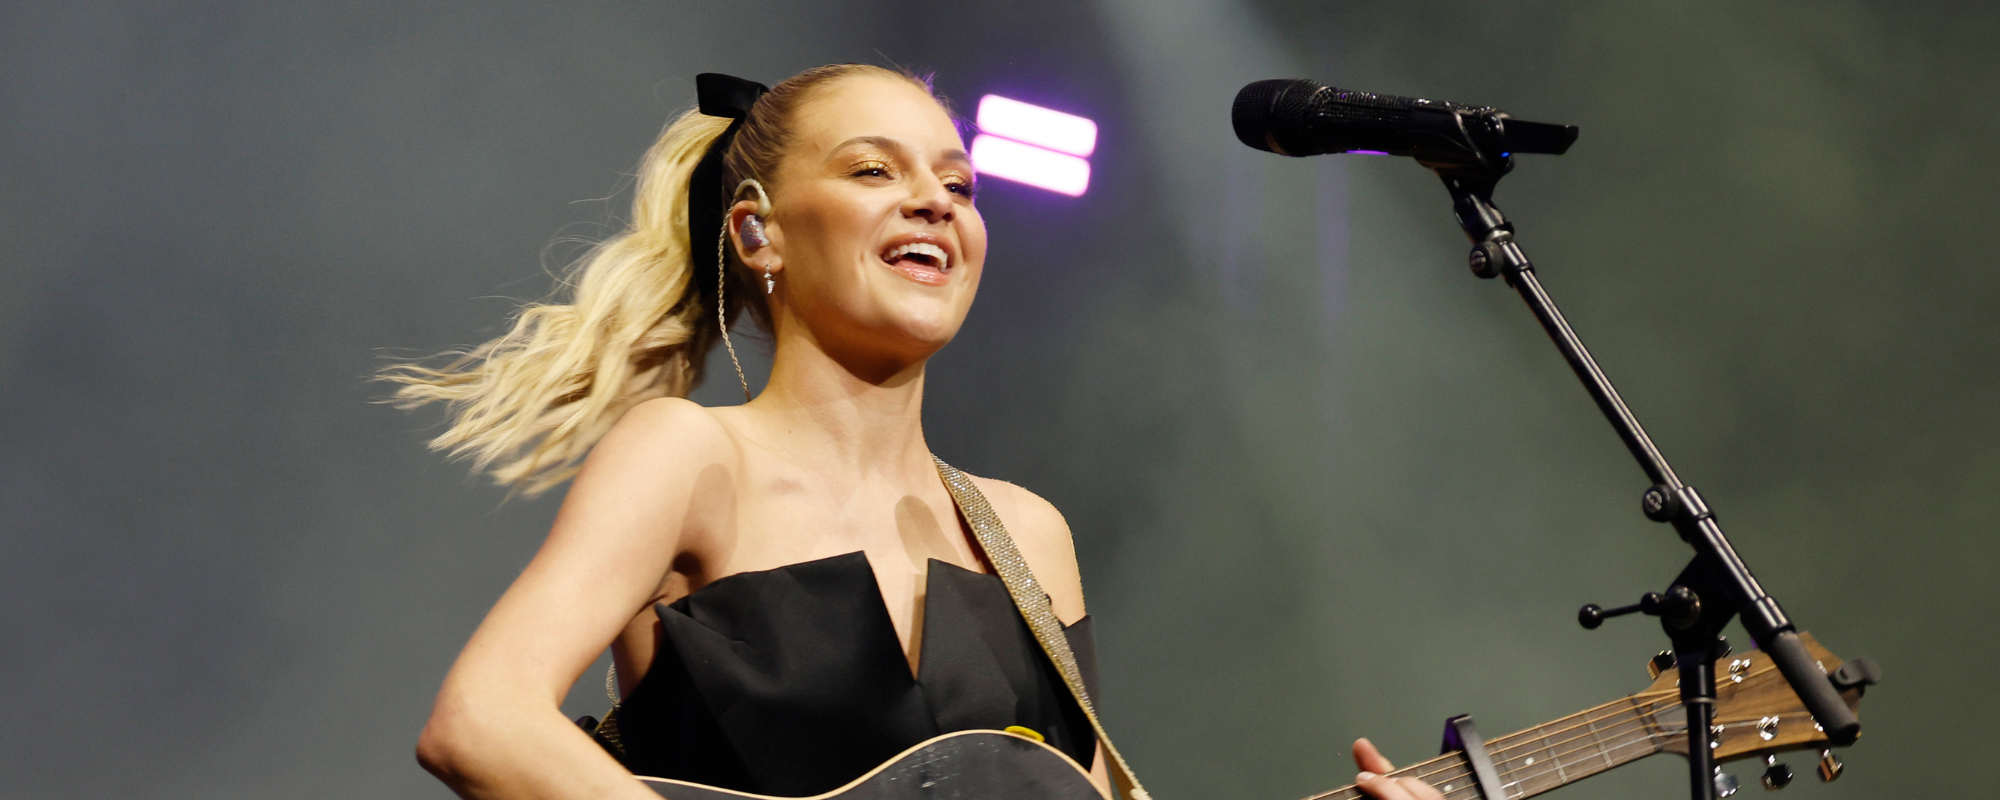 Behind the Meaning of Kelsea Ballerini’s “LOVE IS A COWBOY”